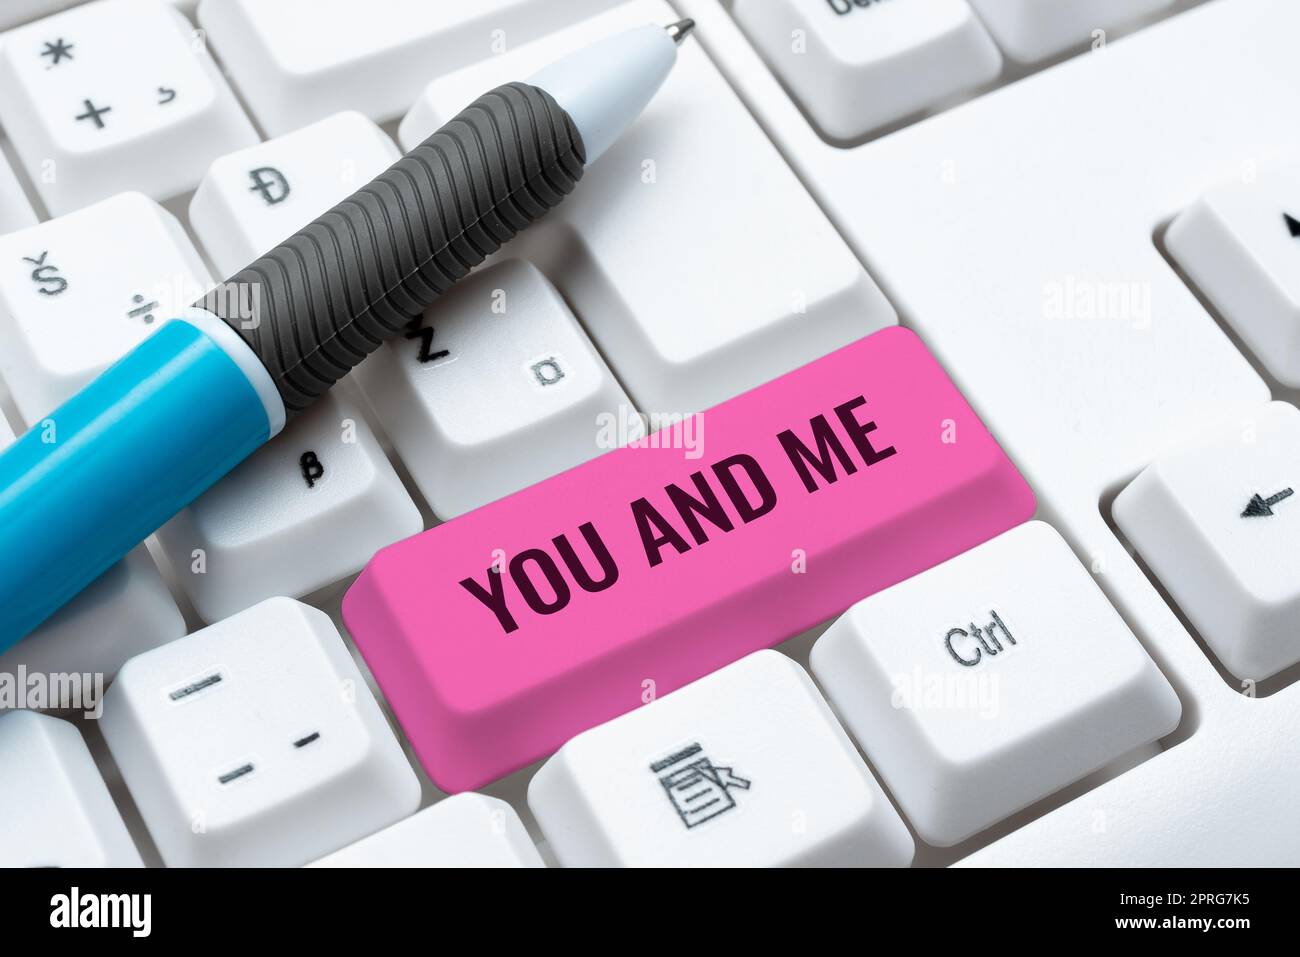 Sign displaying You And Me. Business concept Couple Relationship compromise Expressing romantic feelings Businesswoman Holding Speech Bubble With Important Messages. Stock Photo